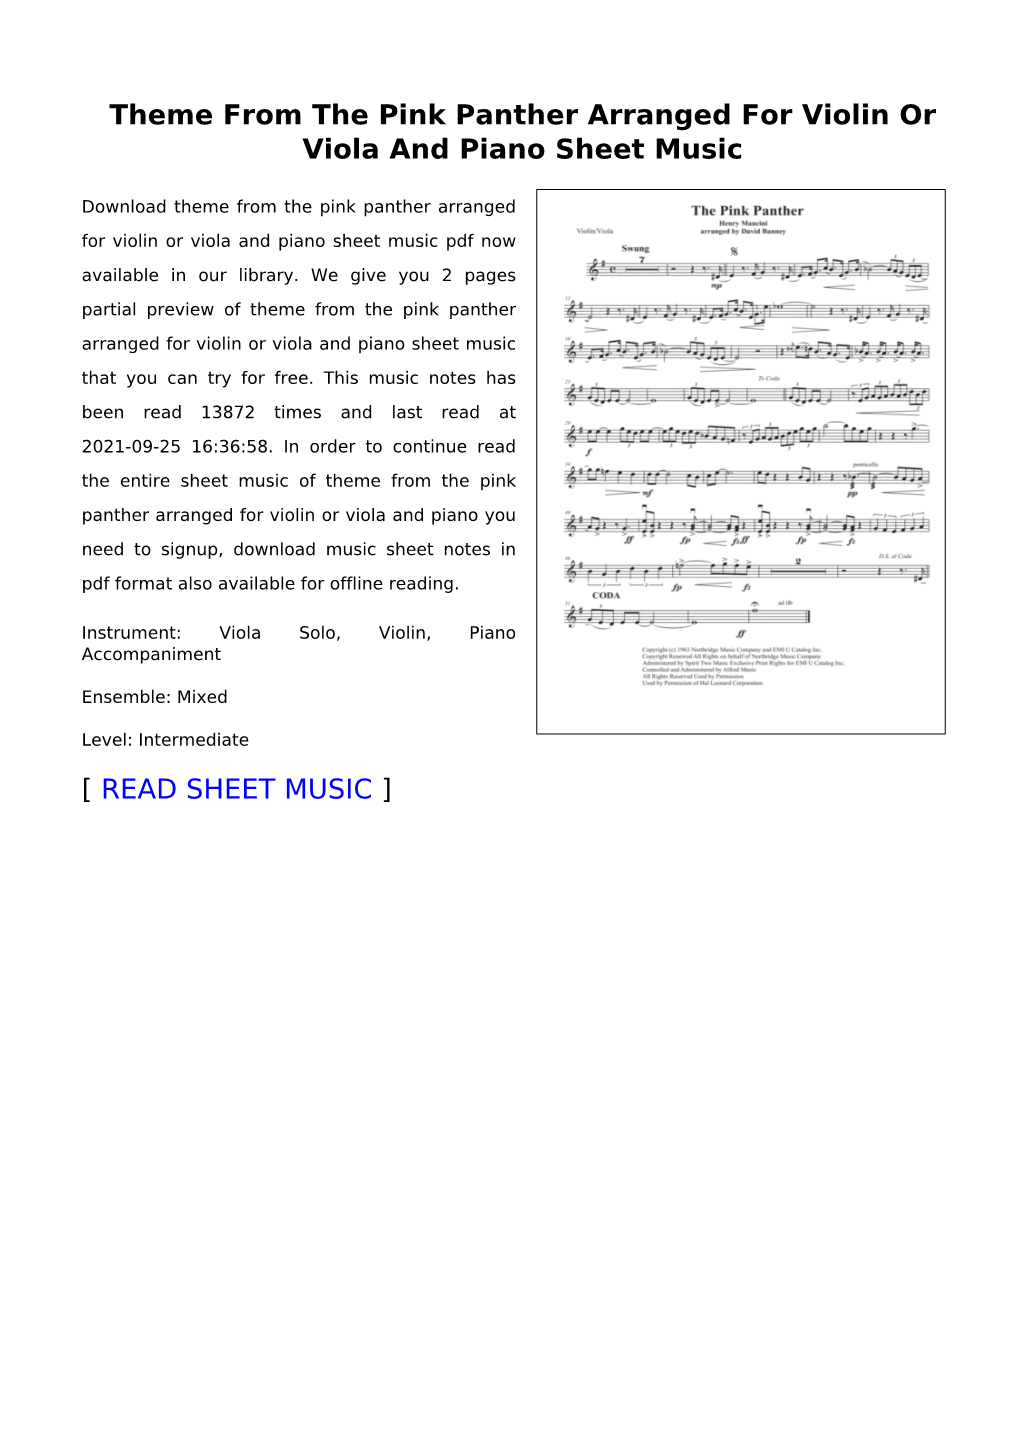 Sheet Music of Theme from the Pink Panther Arranged for Violin Or Viola